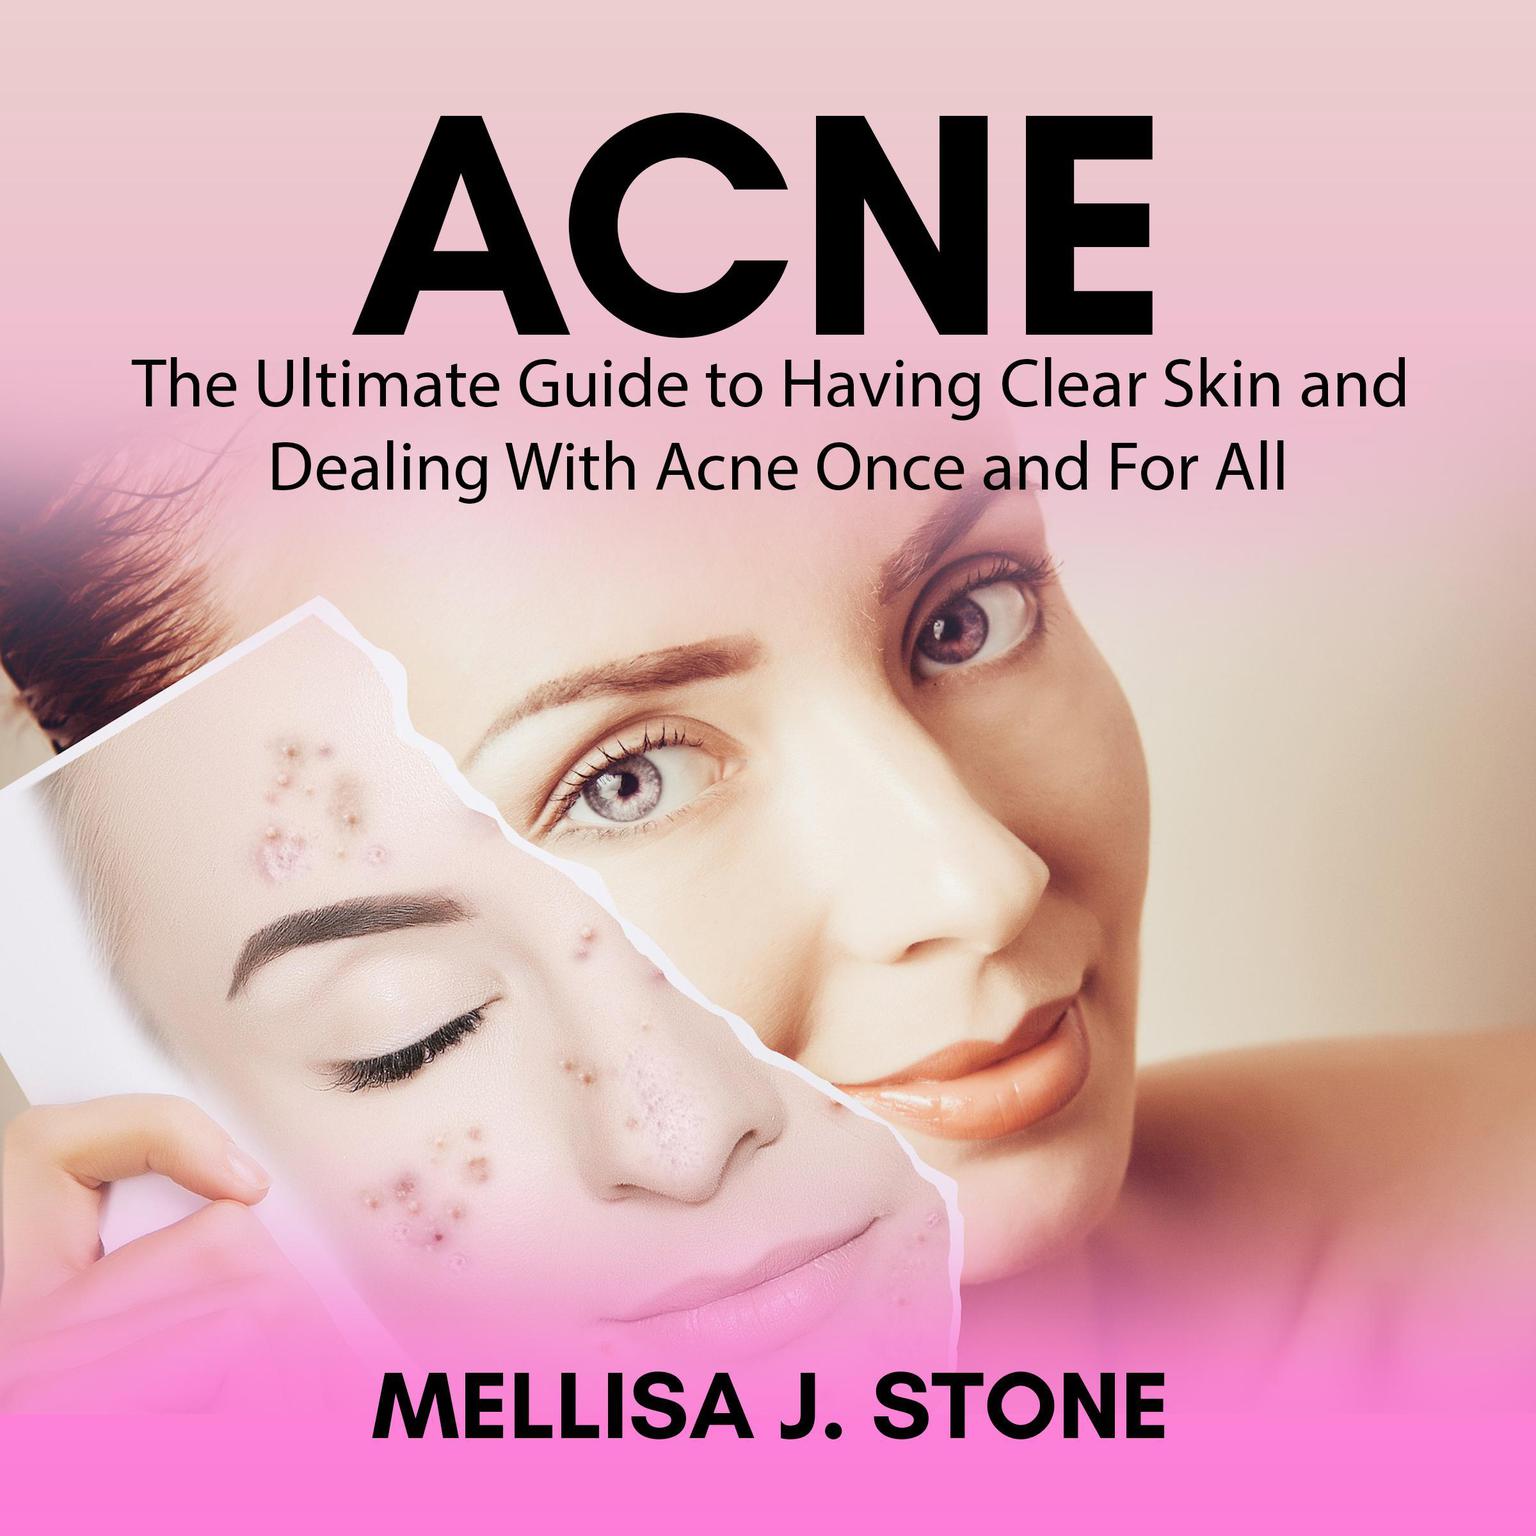 Acne: The Ultimate Guide to Having Clear Skin and Dealing With Acne Once and For All Audiobook, by Mellisa J. Stone